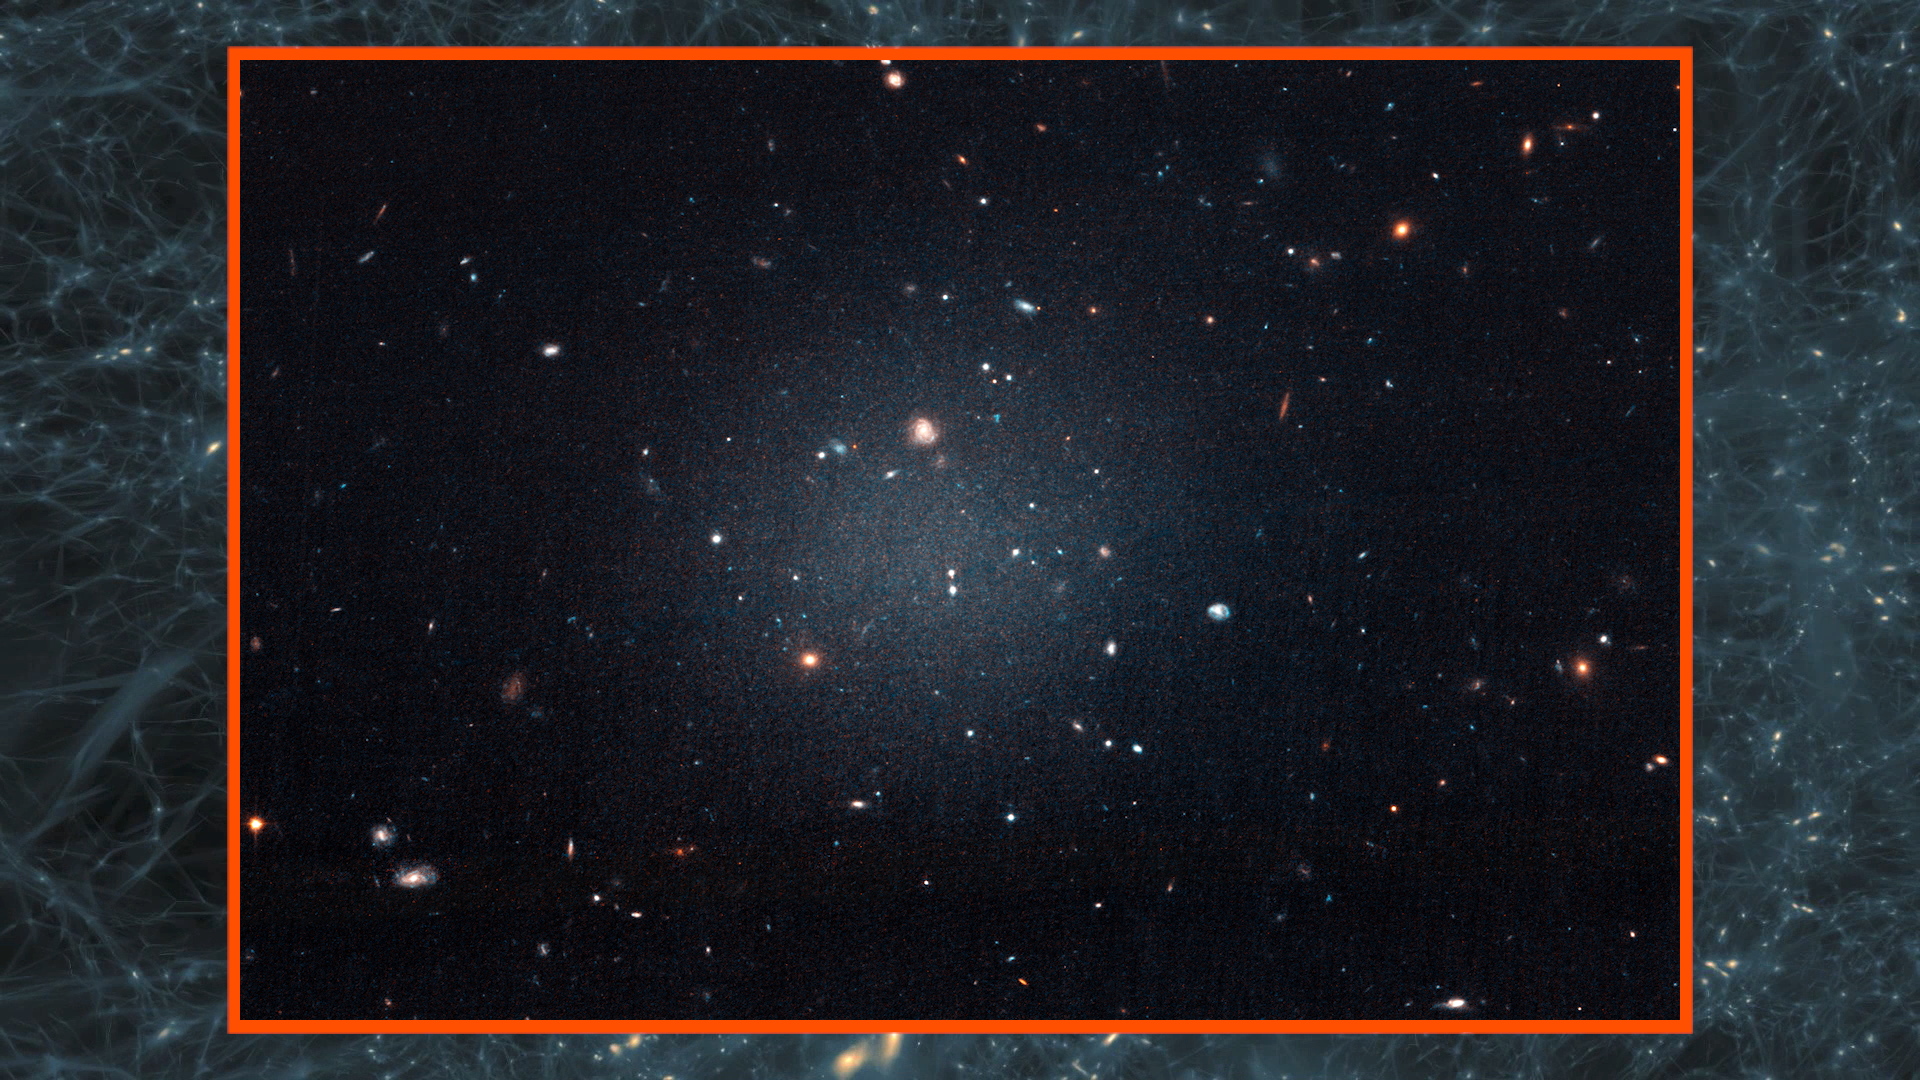 Preview Image for Hubble Views a Galaxy Lacking Dark Matter